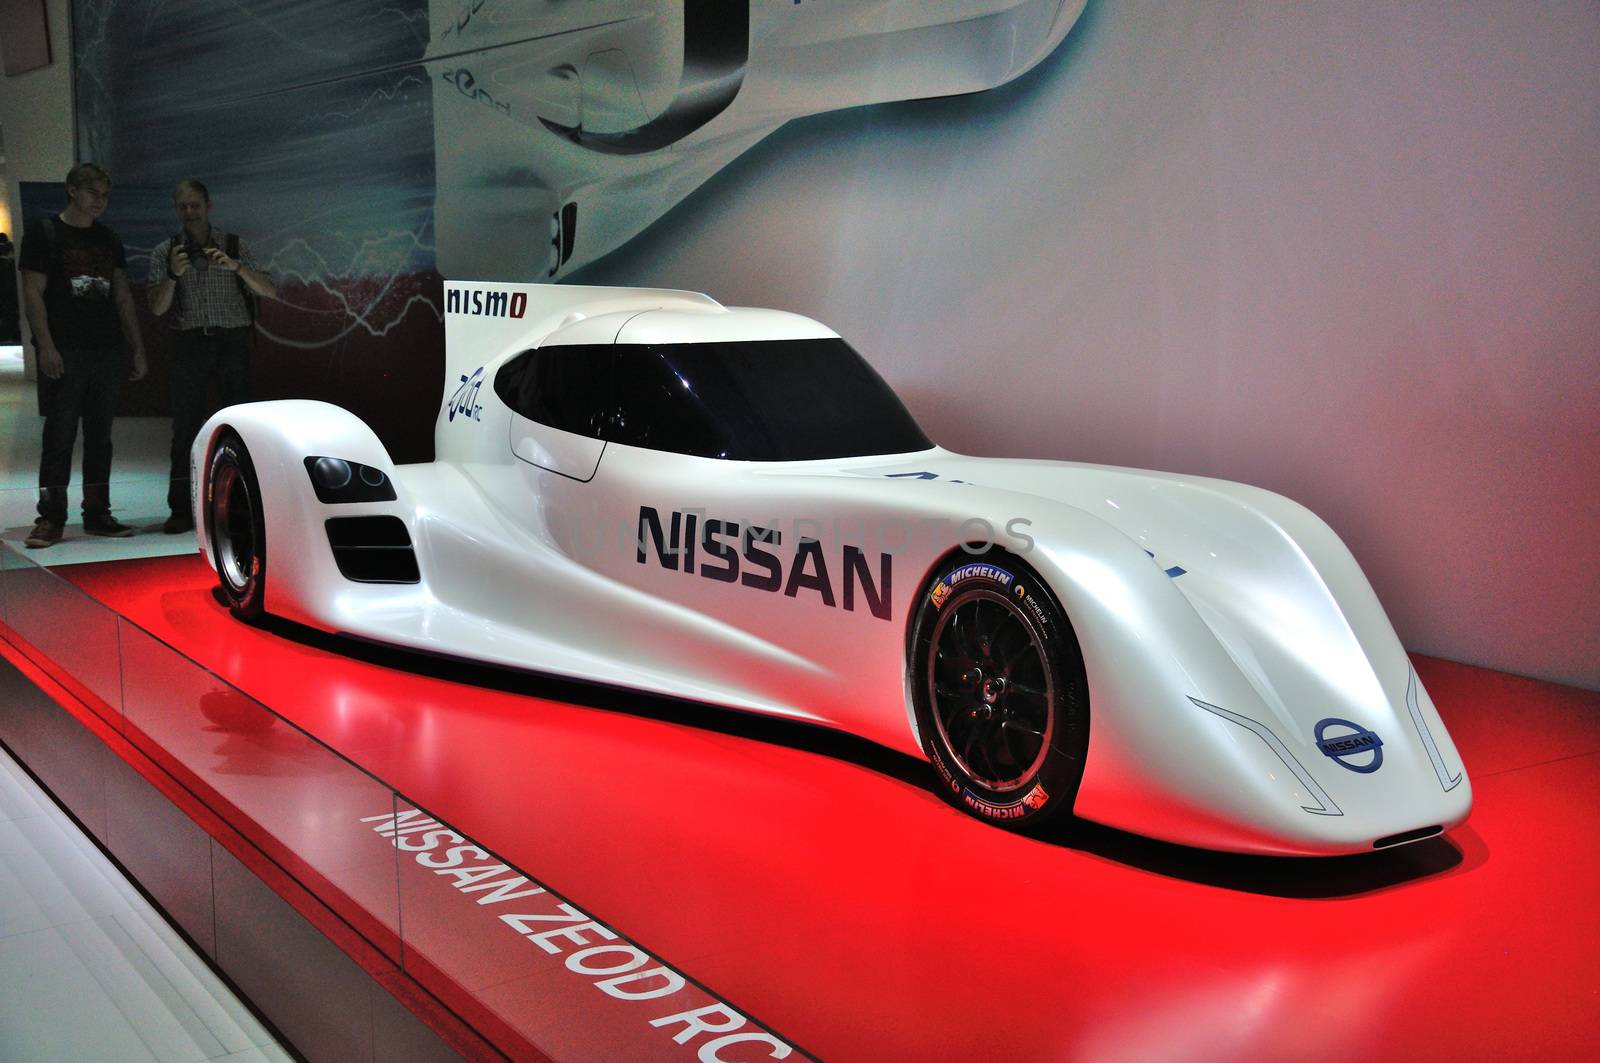 FRANKFURT - SEPT 14: Nissan Unveils Electric Zeod Race Car presented as world premiere at the 65th IAA (Internationale Automobil Ausstellung) on September 14, 2013 in Frankfurt, Germany